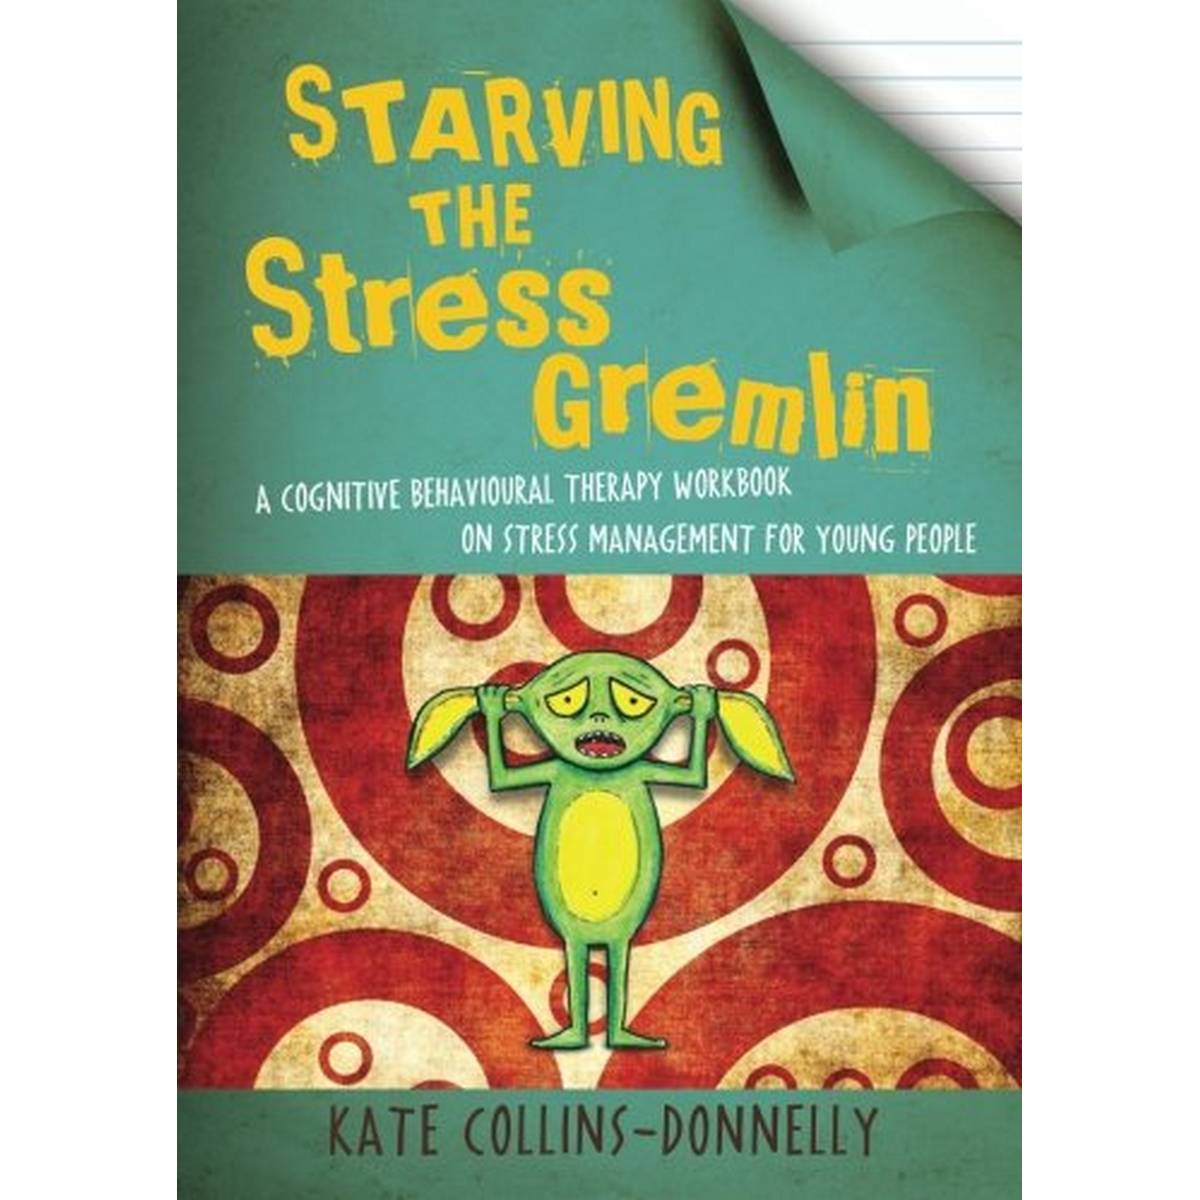 Starving the Stress Gremlin